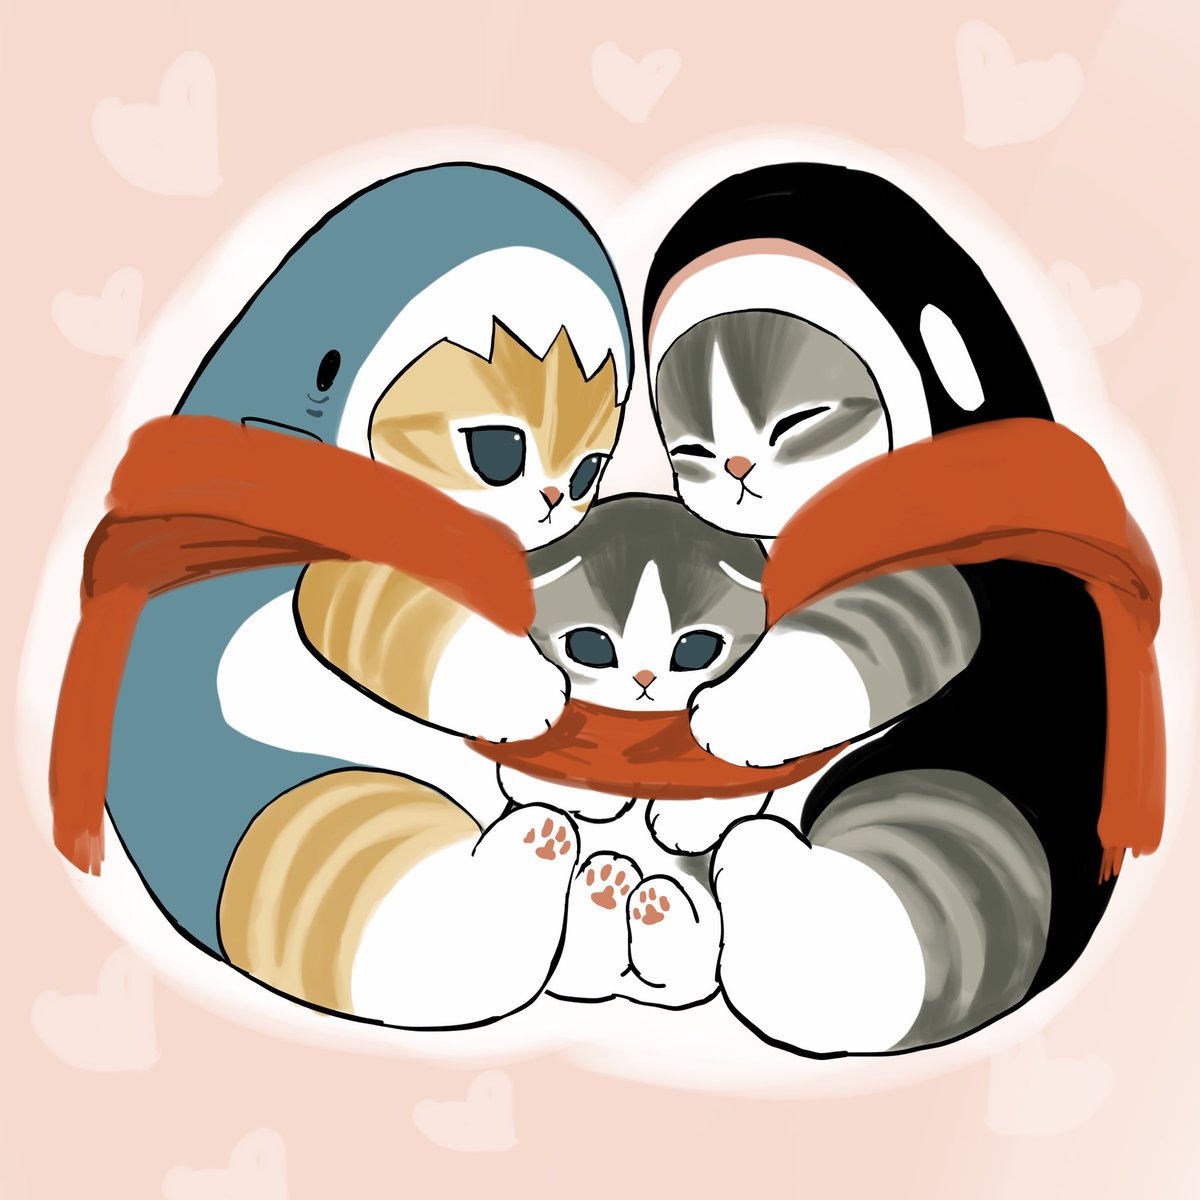 red scarf scarf no humans shared clothes shared scarf heart animal focus  illustration images